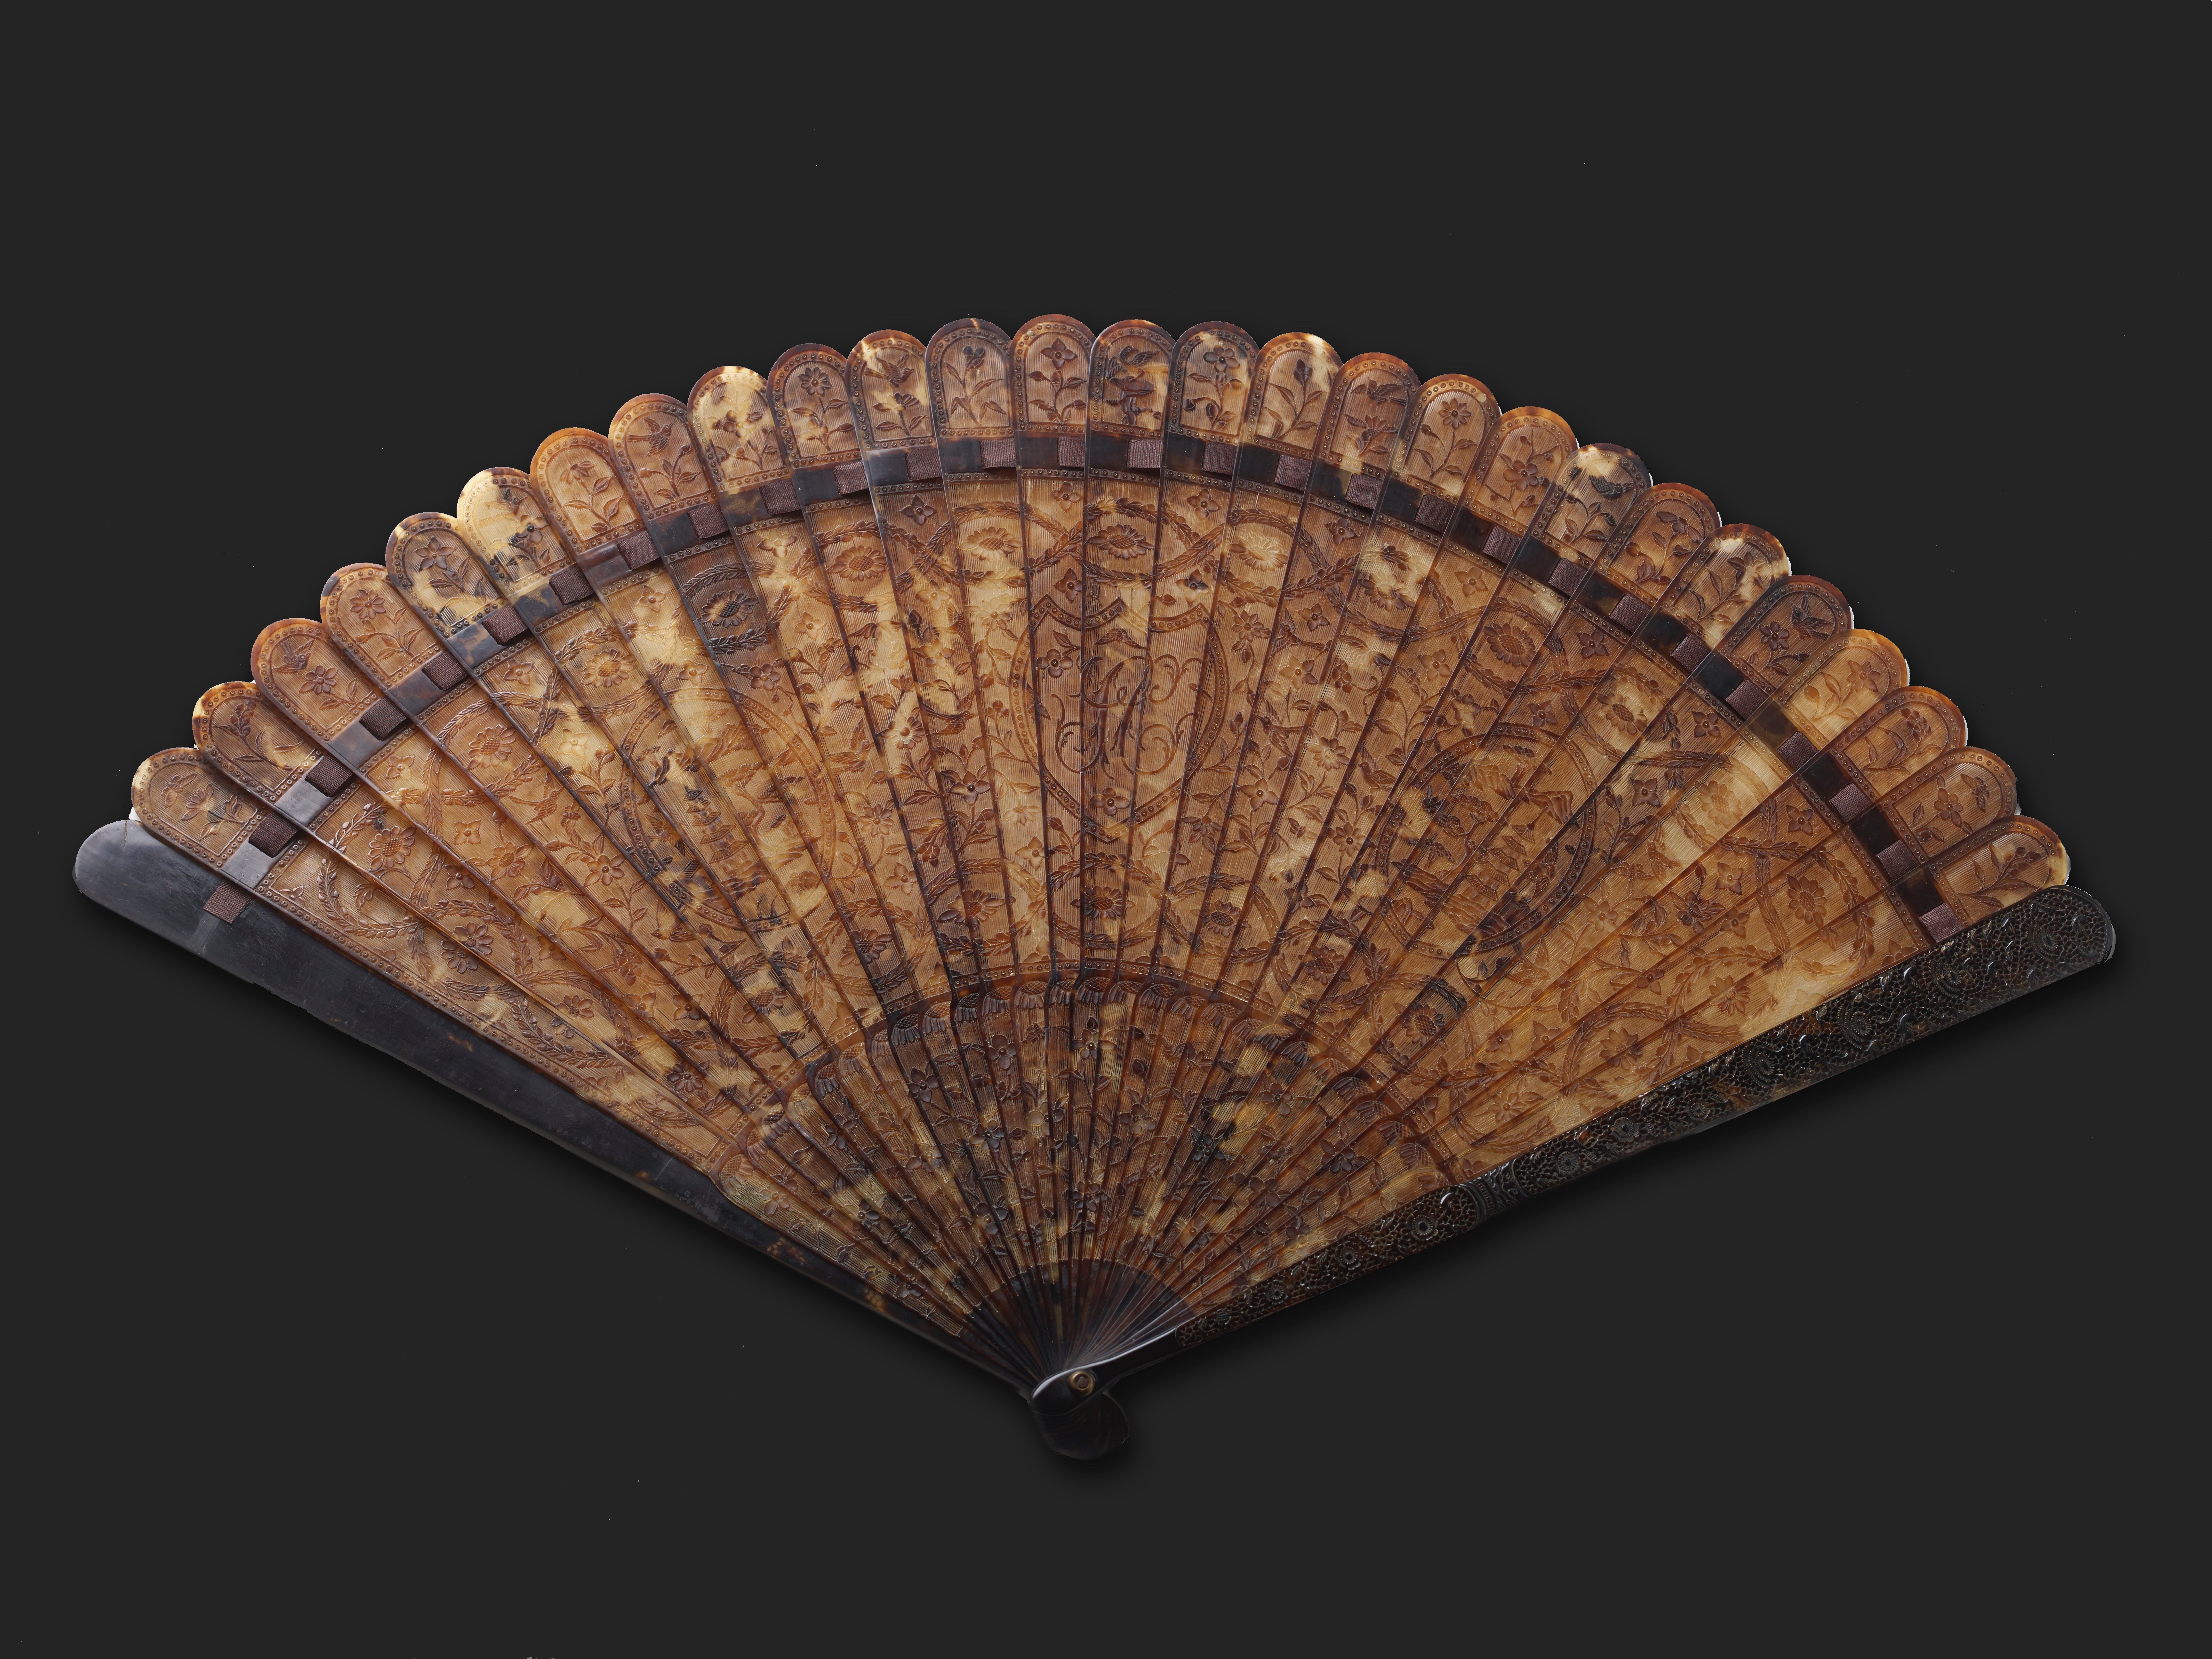 A FINE AND RARE CHINESE EXPORT CARVED TORTOISESHELL BRISE FAN, CIRCA 1780-1790